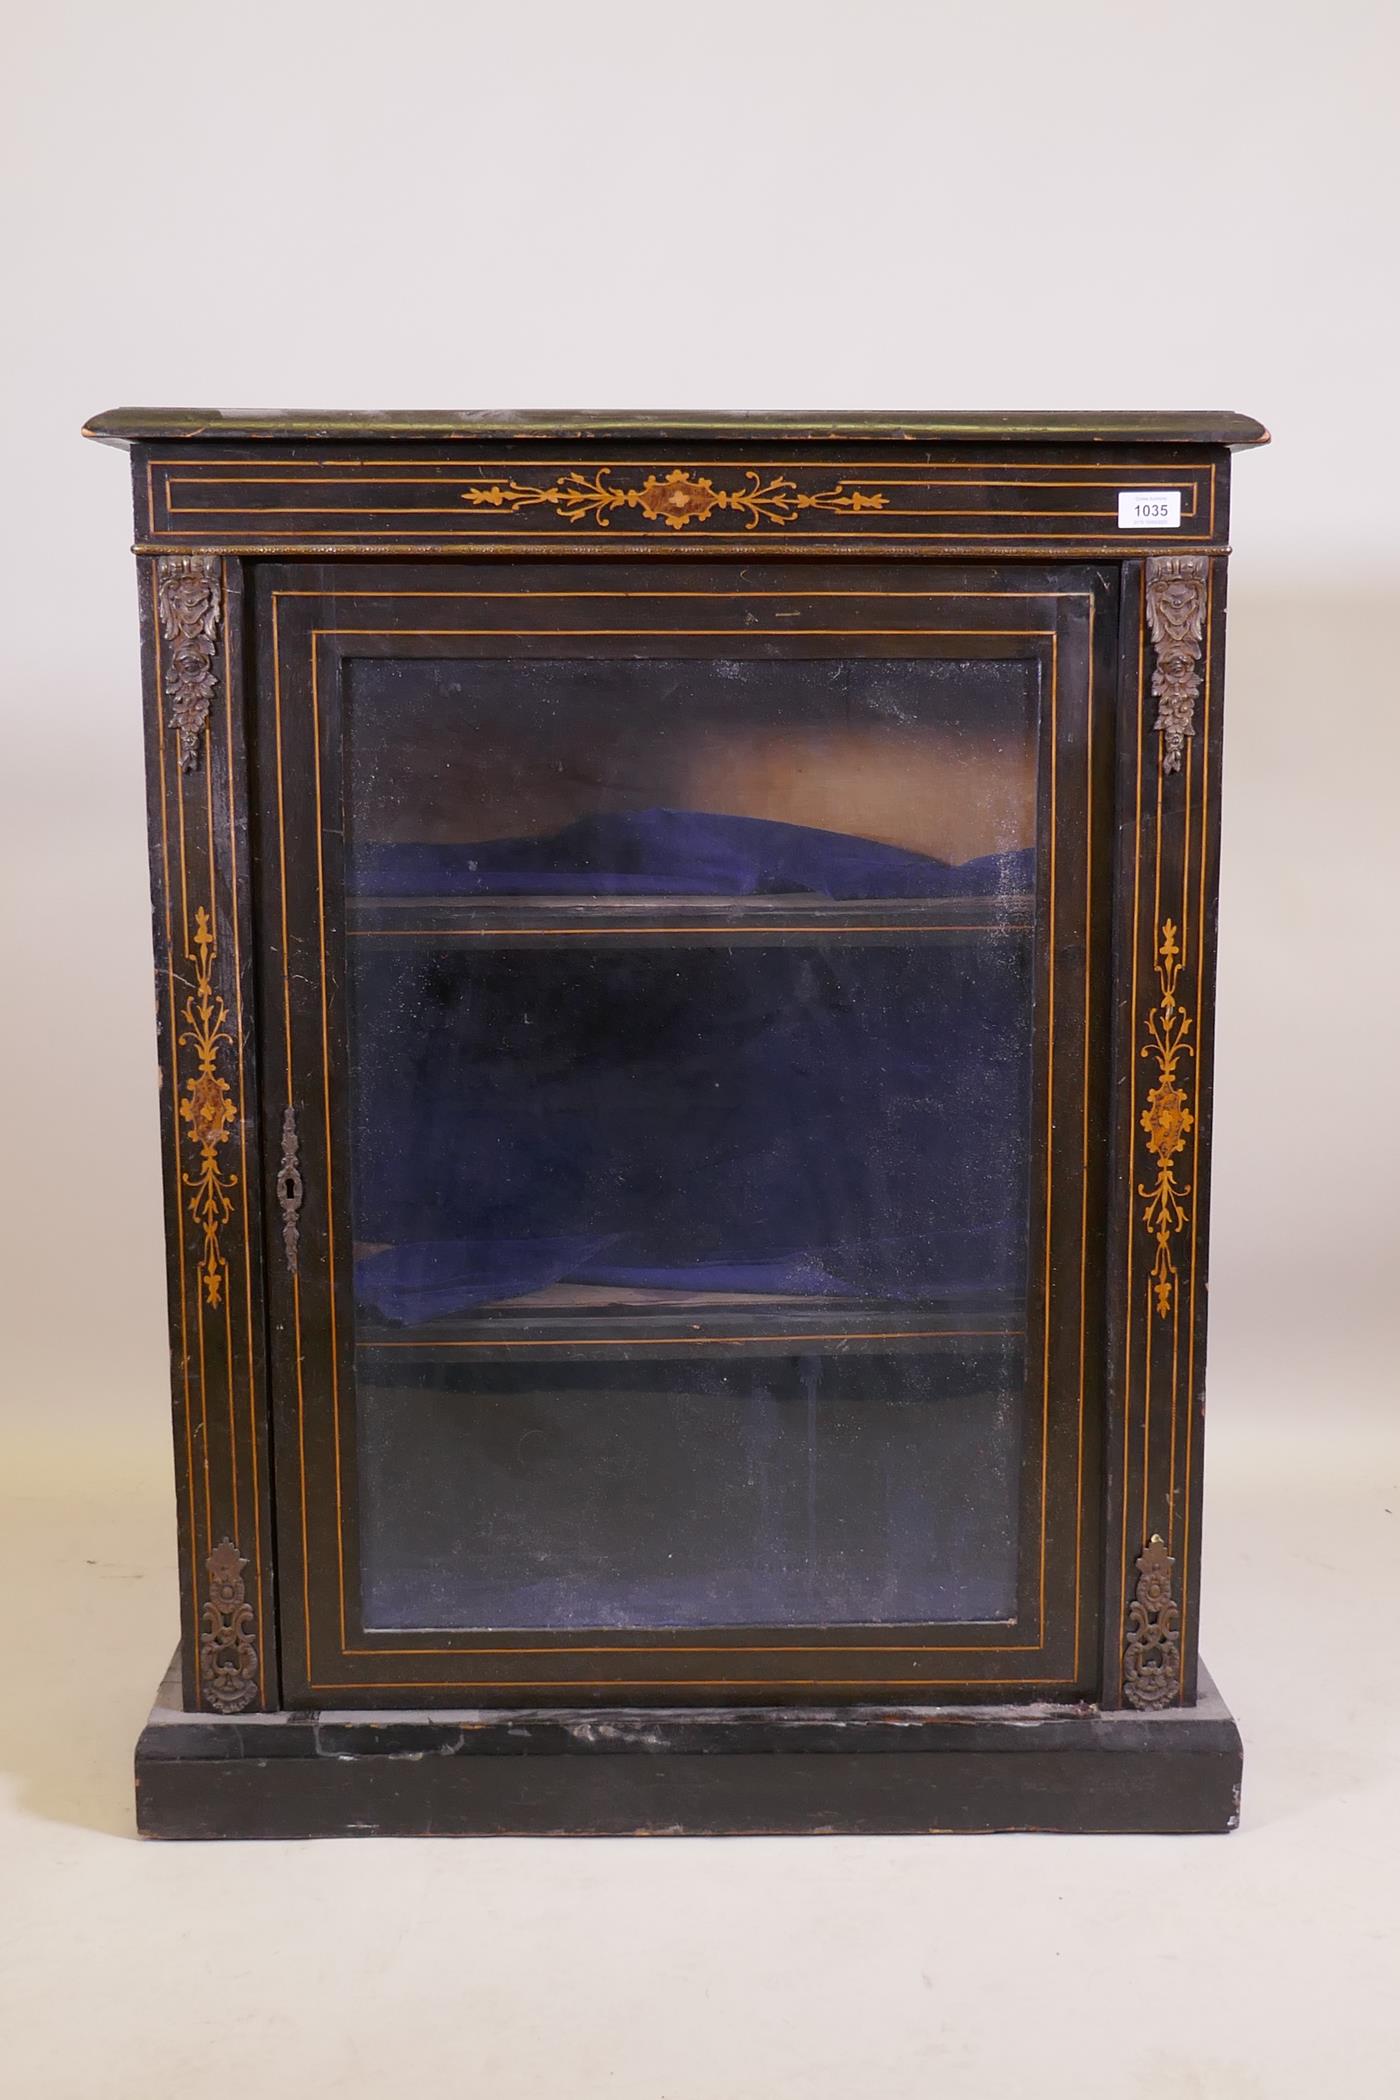 A Victorian ebonised and inlaid pier cabinet with brass mounts and single glazed door, raised on a